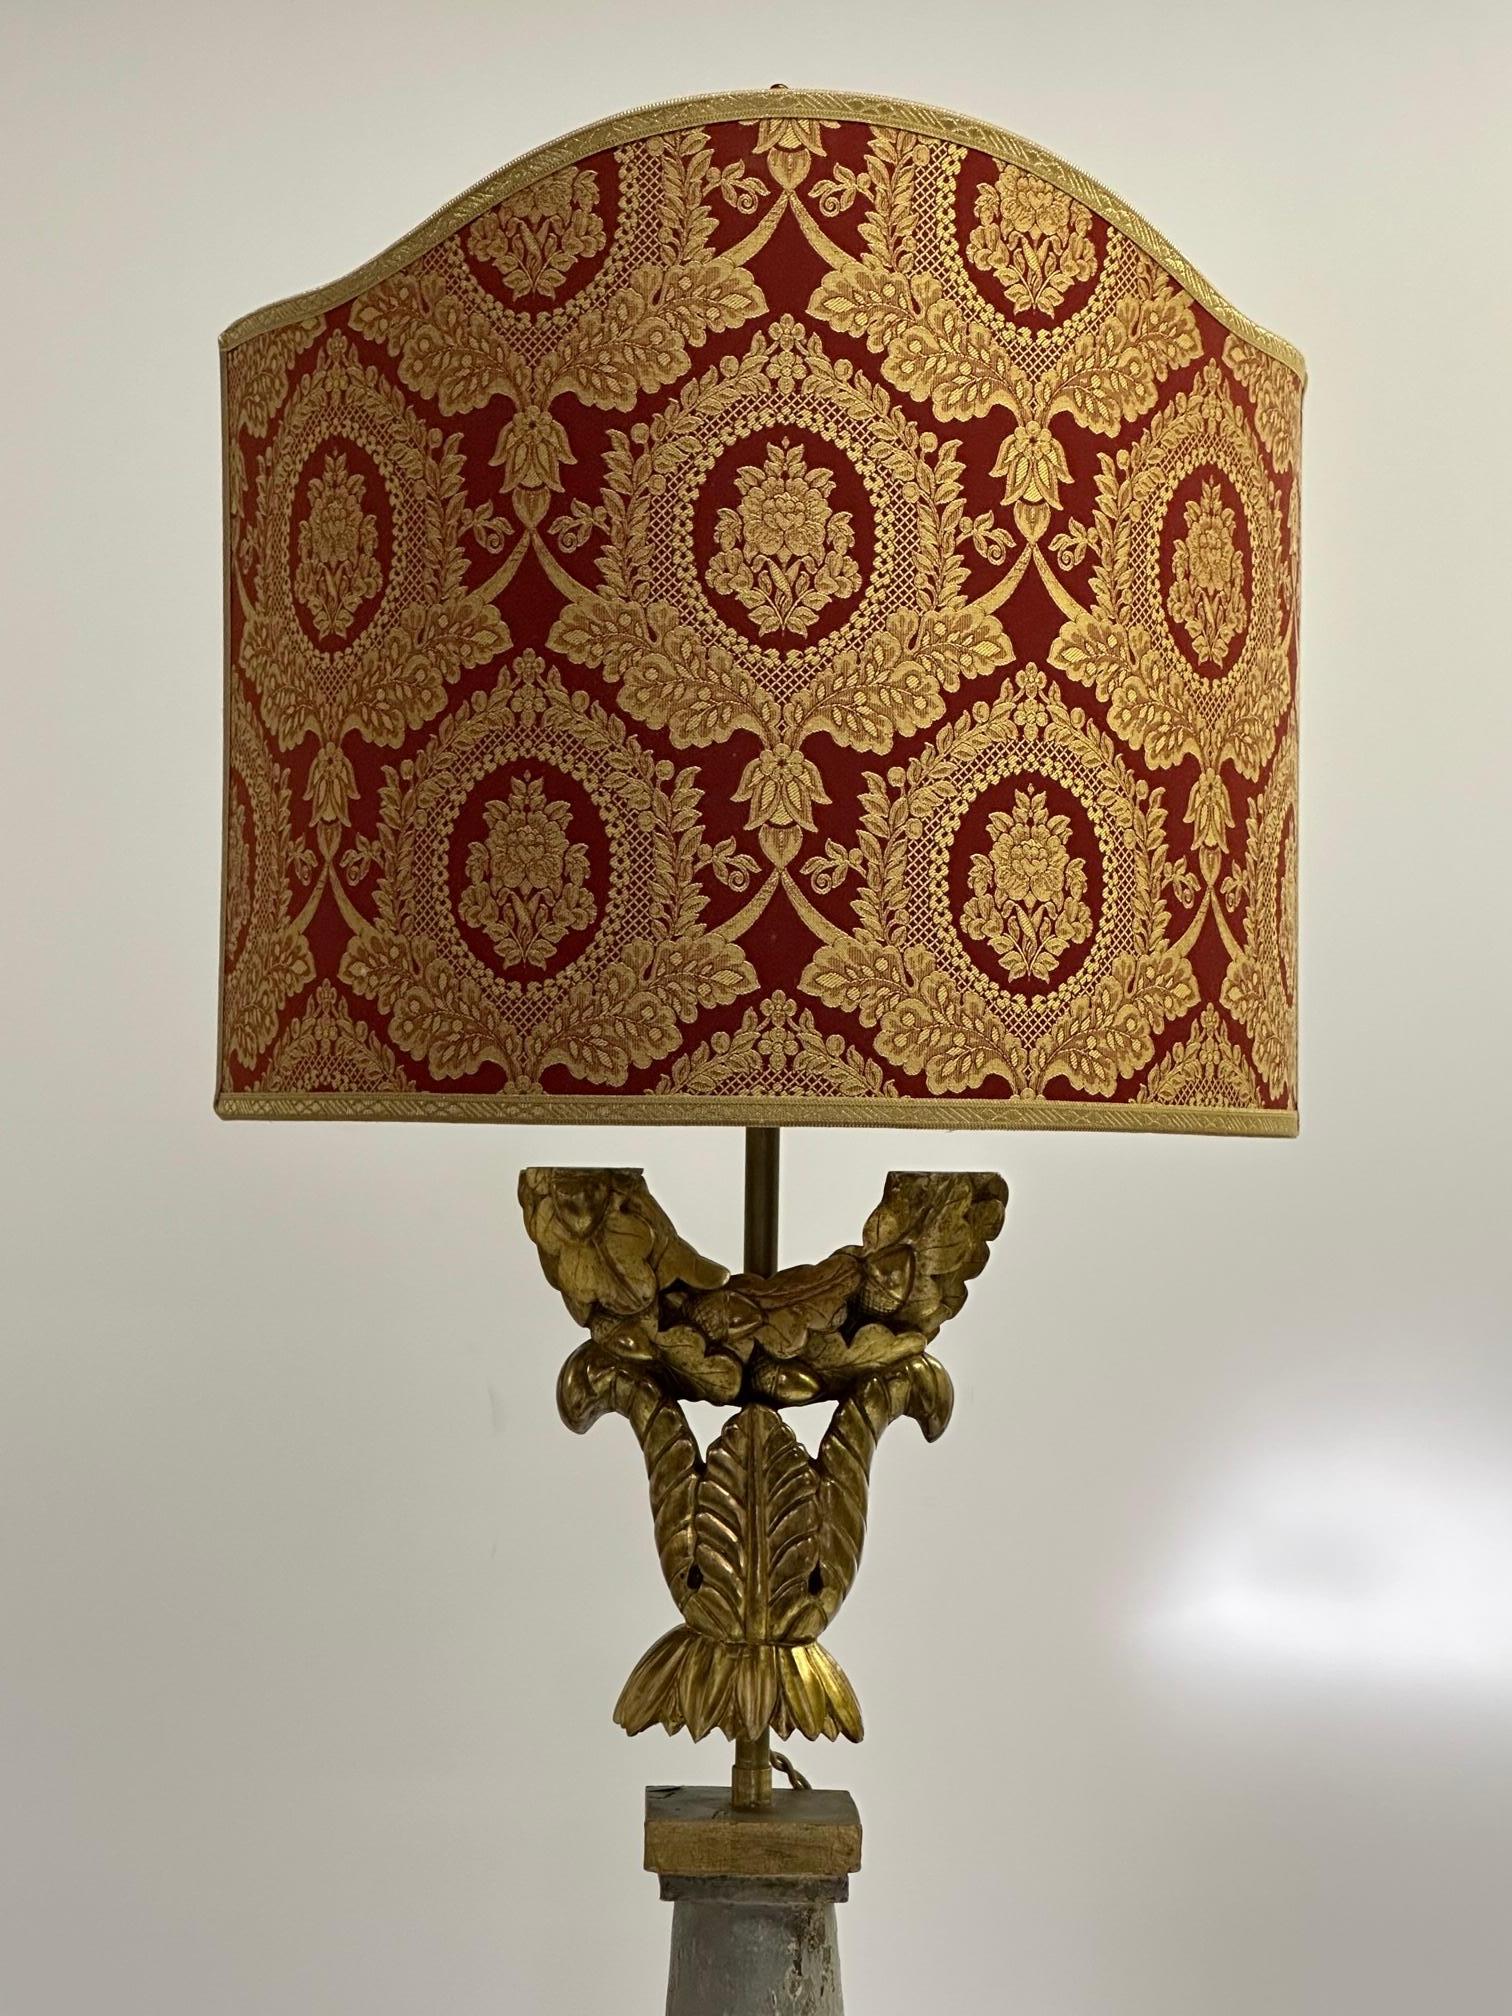 Very unusual cleverly made and artful French tall table lamp assembled from antique fragments of giltwood, painted wood and brass. The shade is custom and the lamp is french wired with silk cord.
Measures: shade is 16 W 13.5 H 7.5 D.
lamp itself